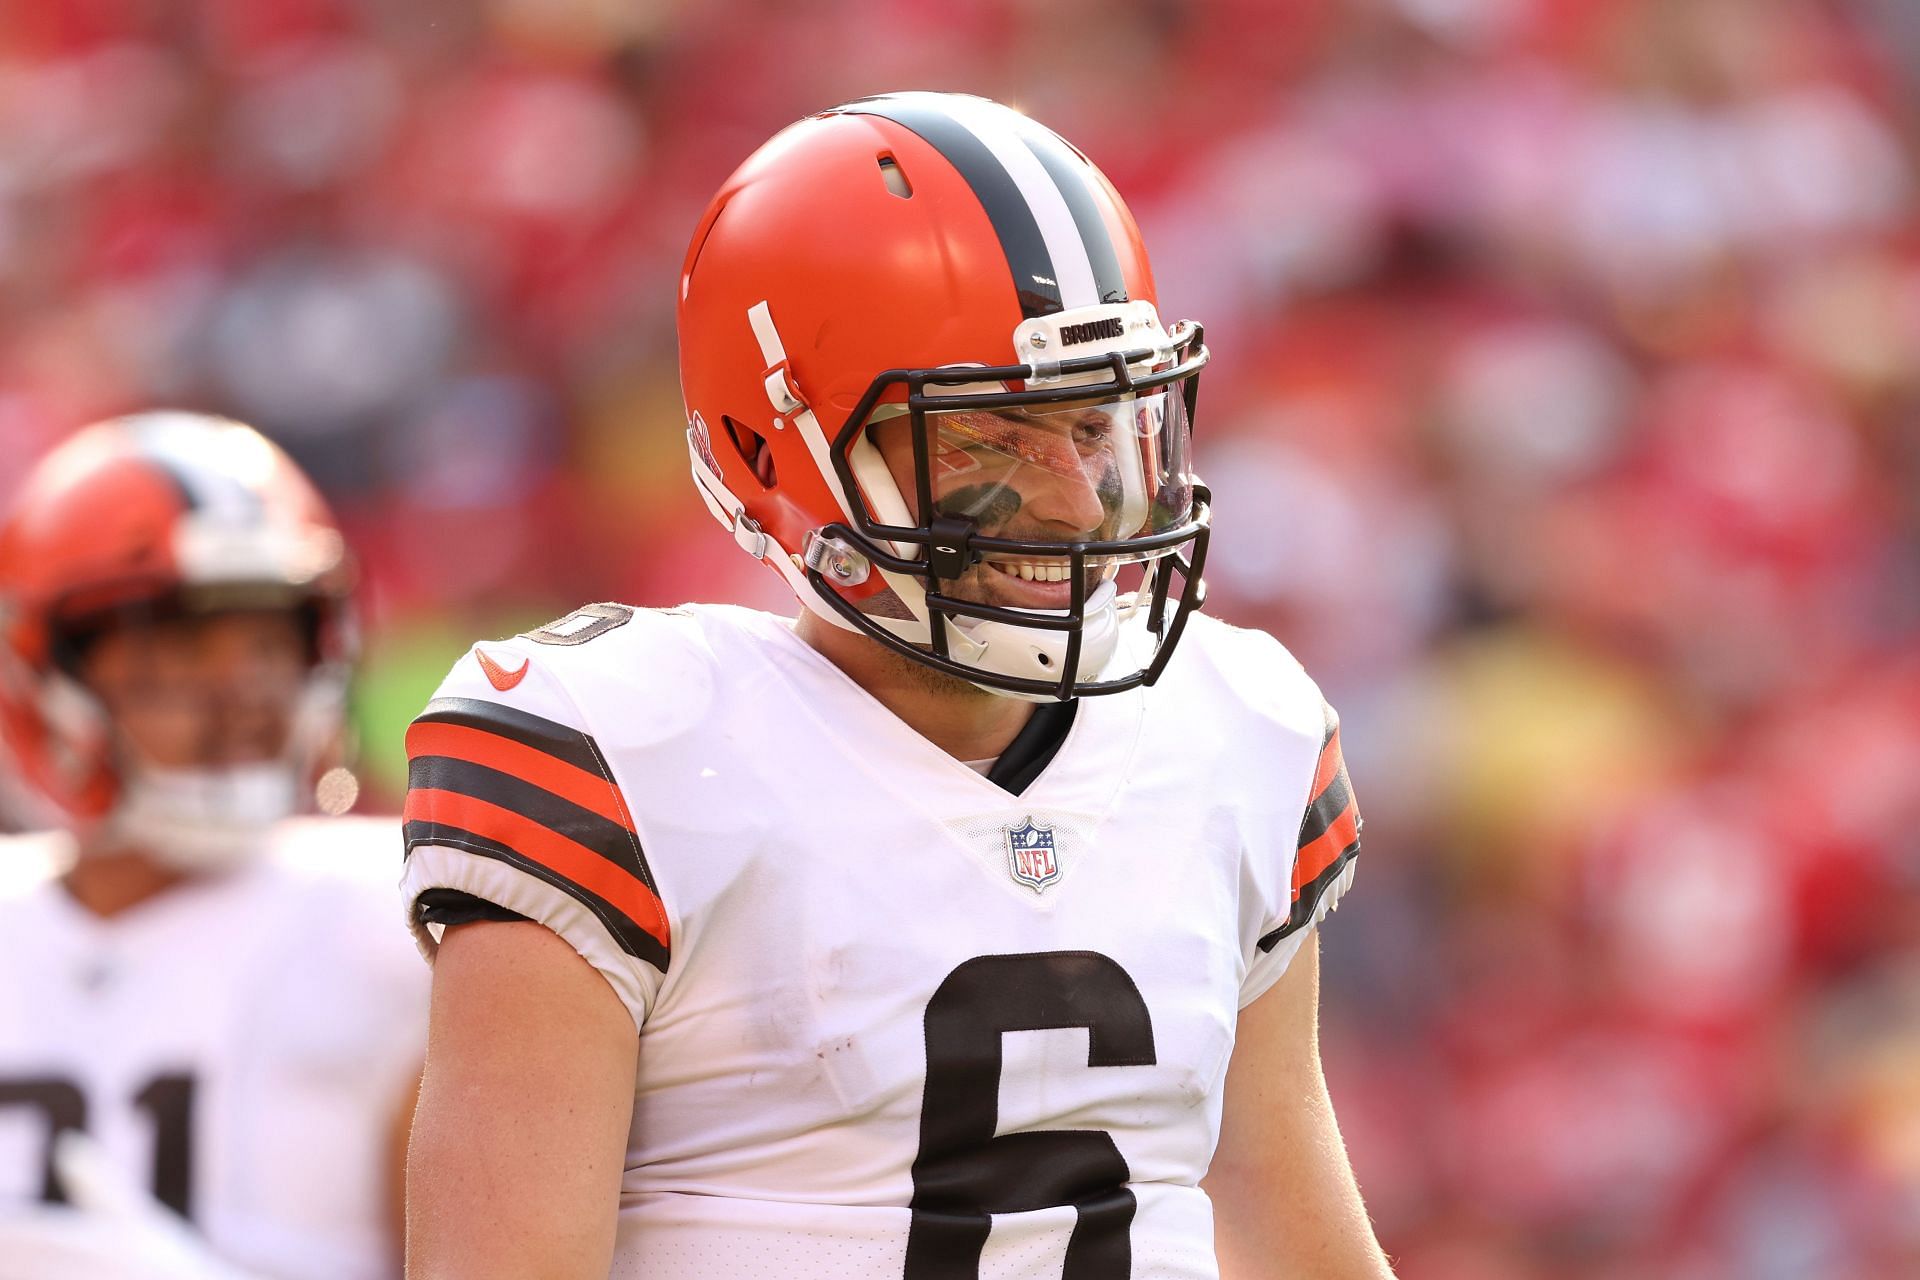 Cleveland Browns quarterback Baker Mayfield is on the lookout for a new home